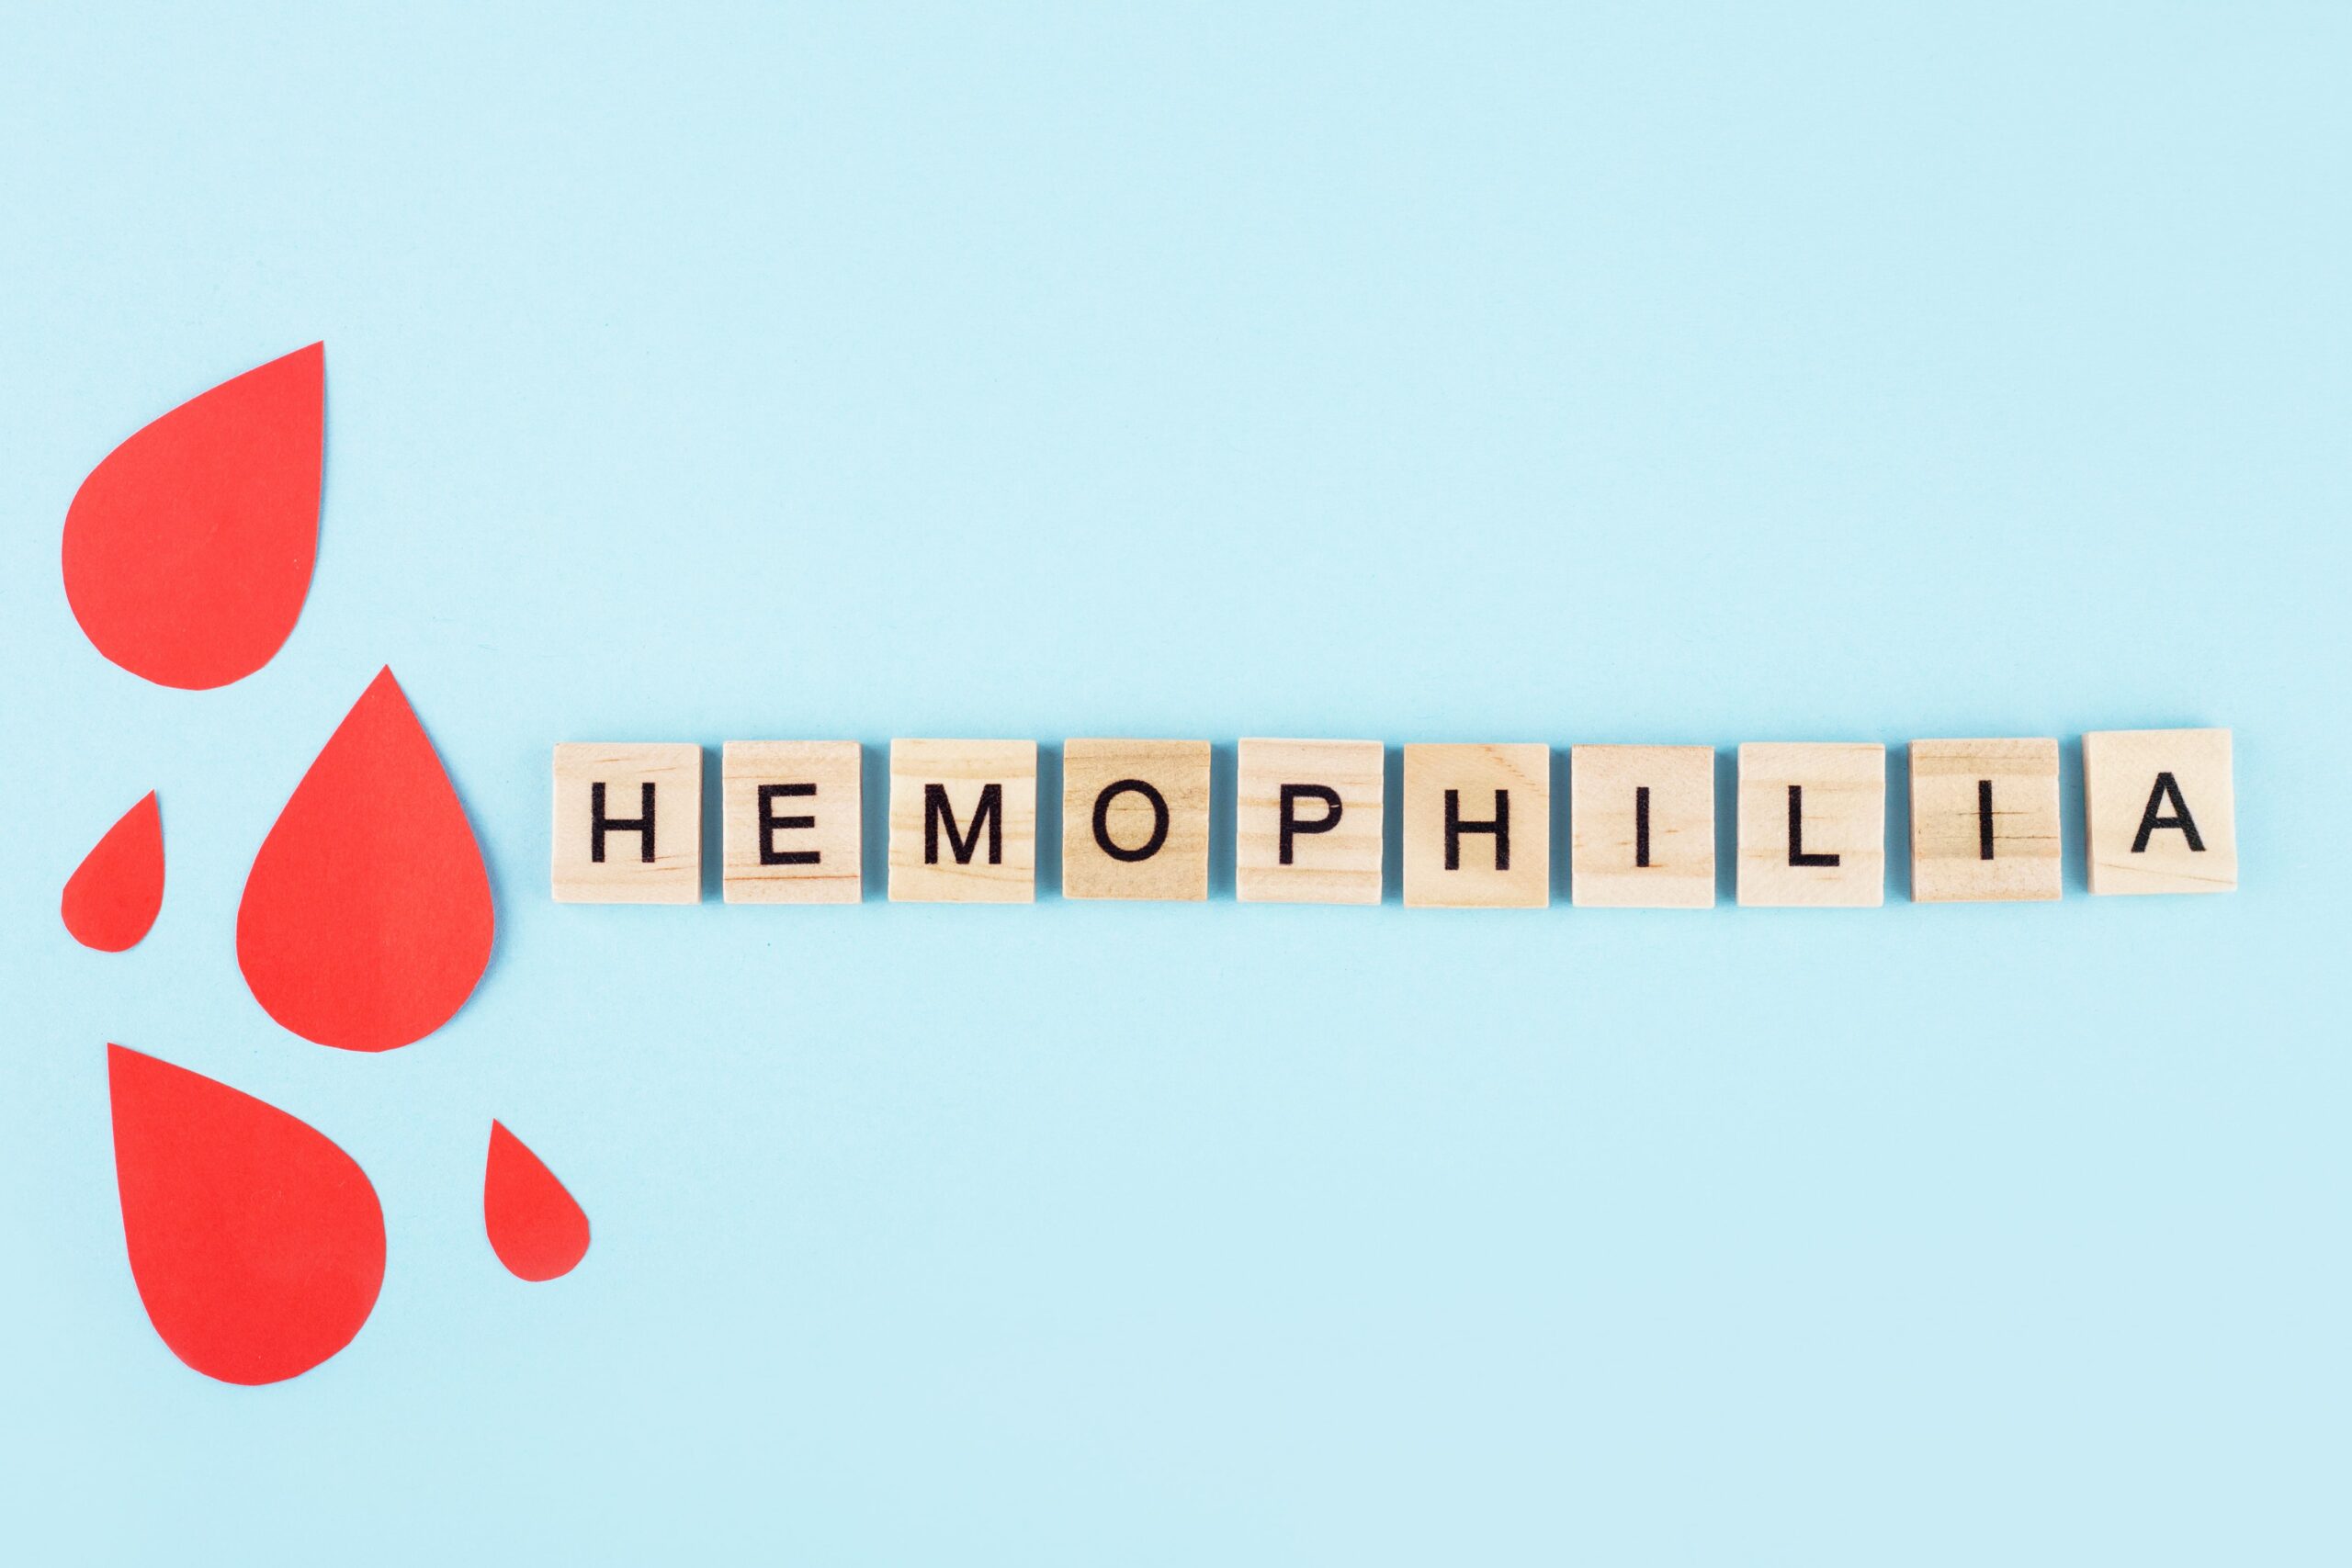 Gene Therapy with Novel FVIII Variant Shows Stable Long-term Improvement in Hemophilia A